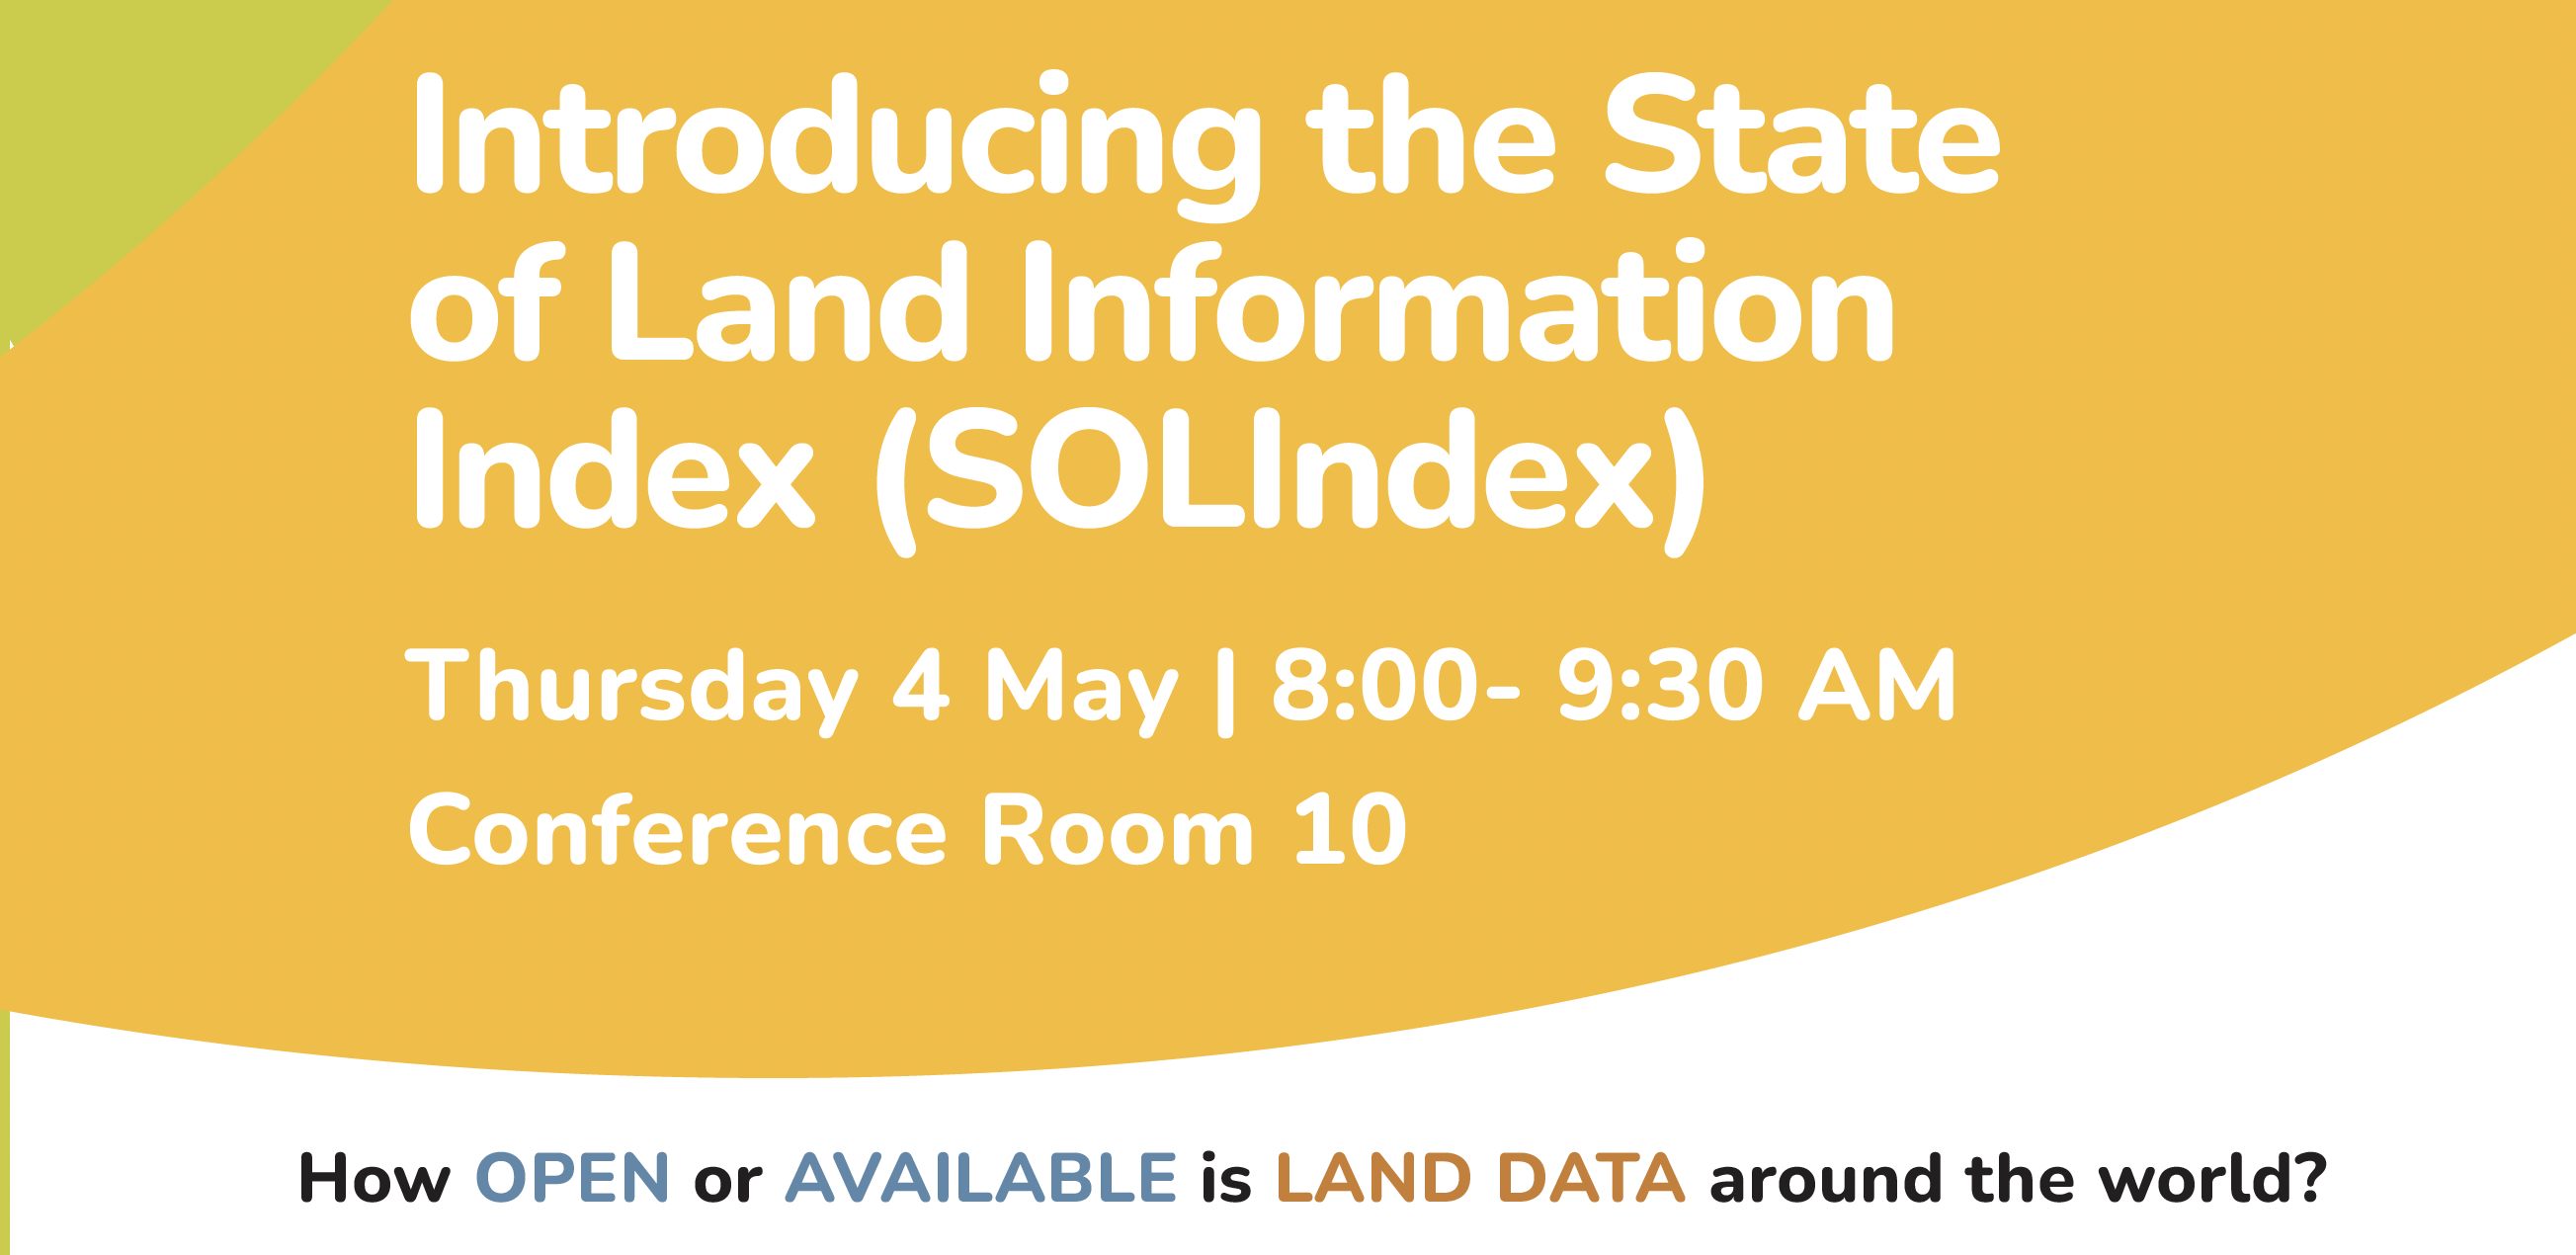 Introducing the State of Land Information Index